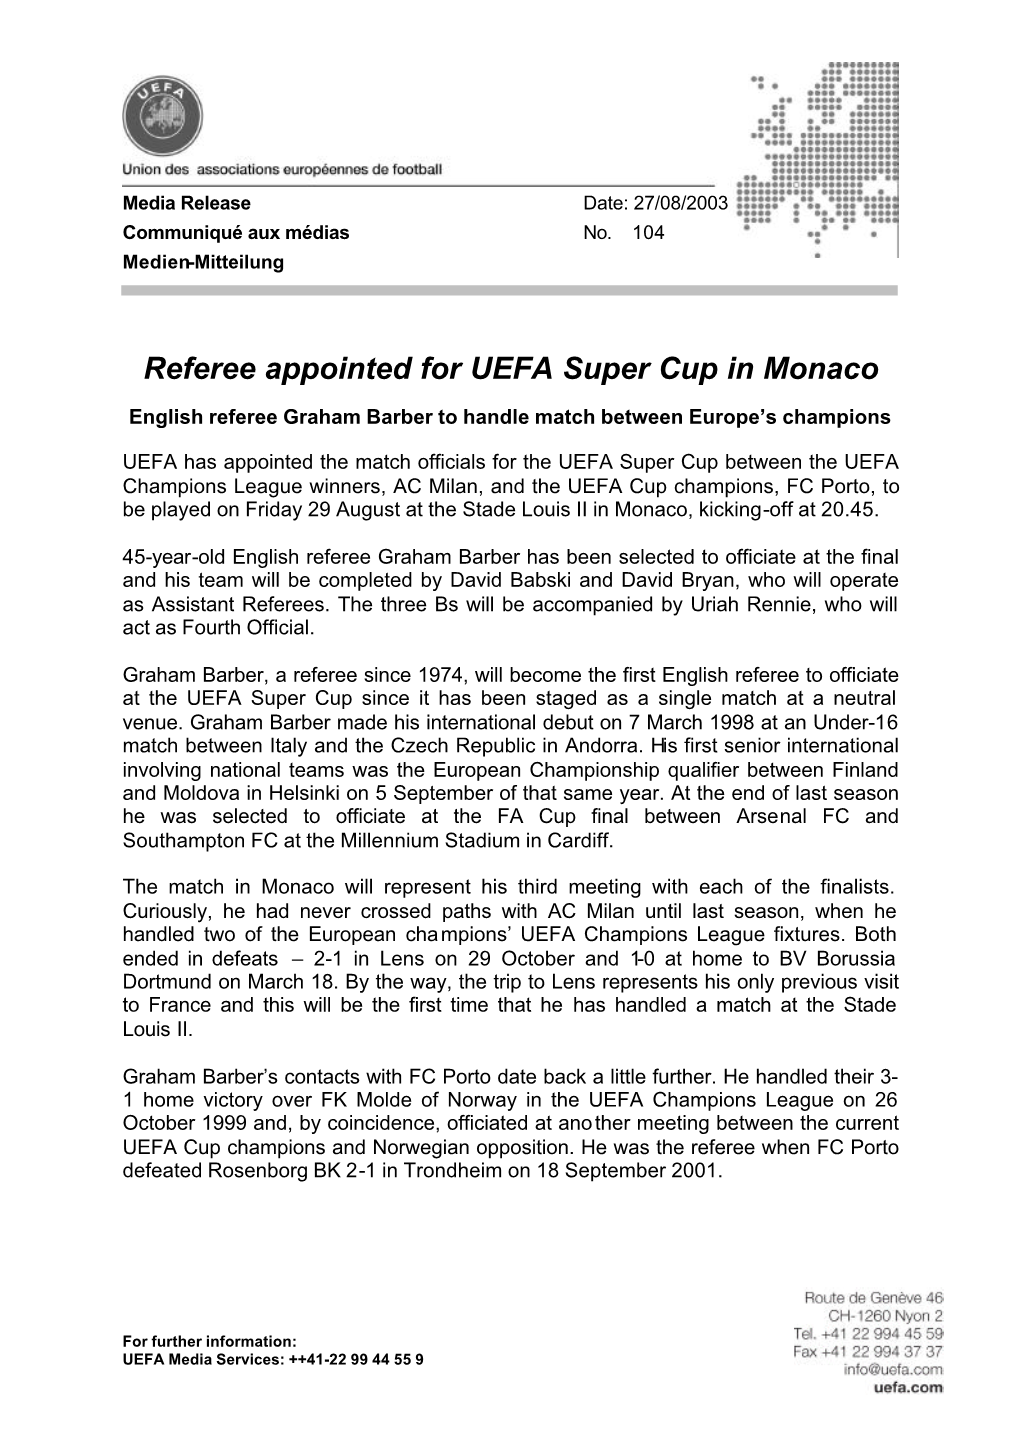 Referee Appointed for UEFA Super Cup in Monaco